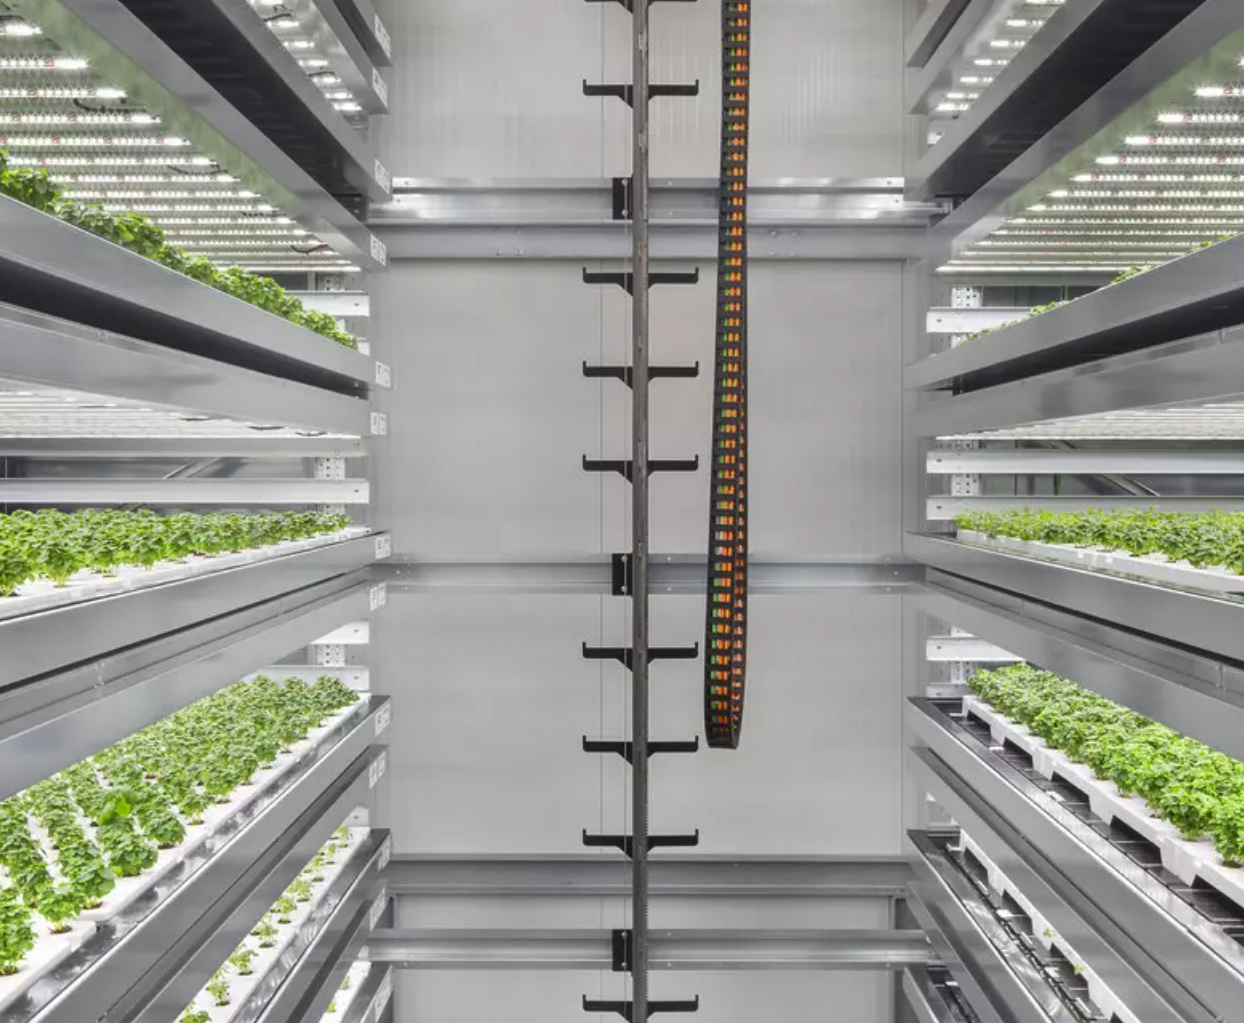 How will we feed a hotter, smarter and more crowded world?